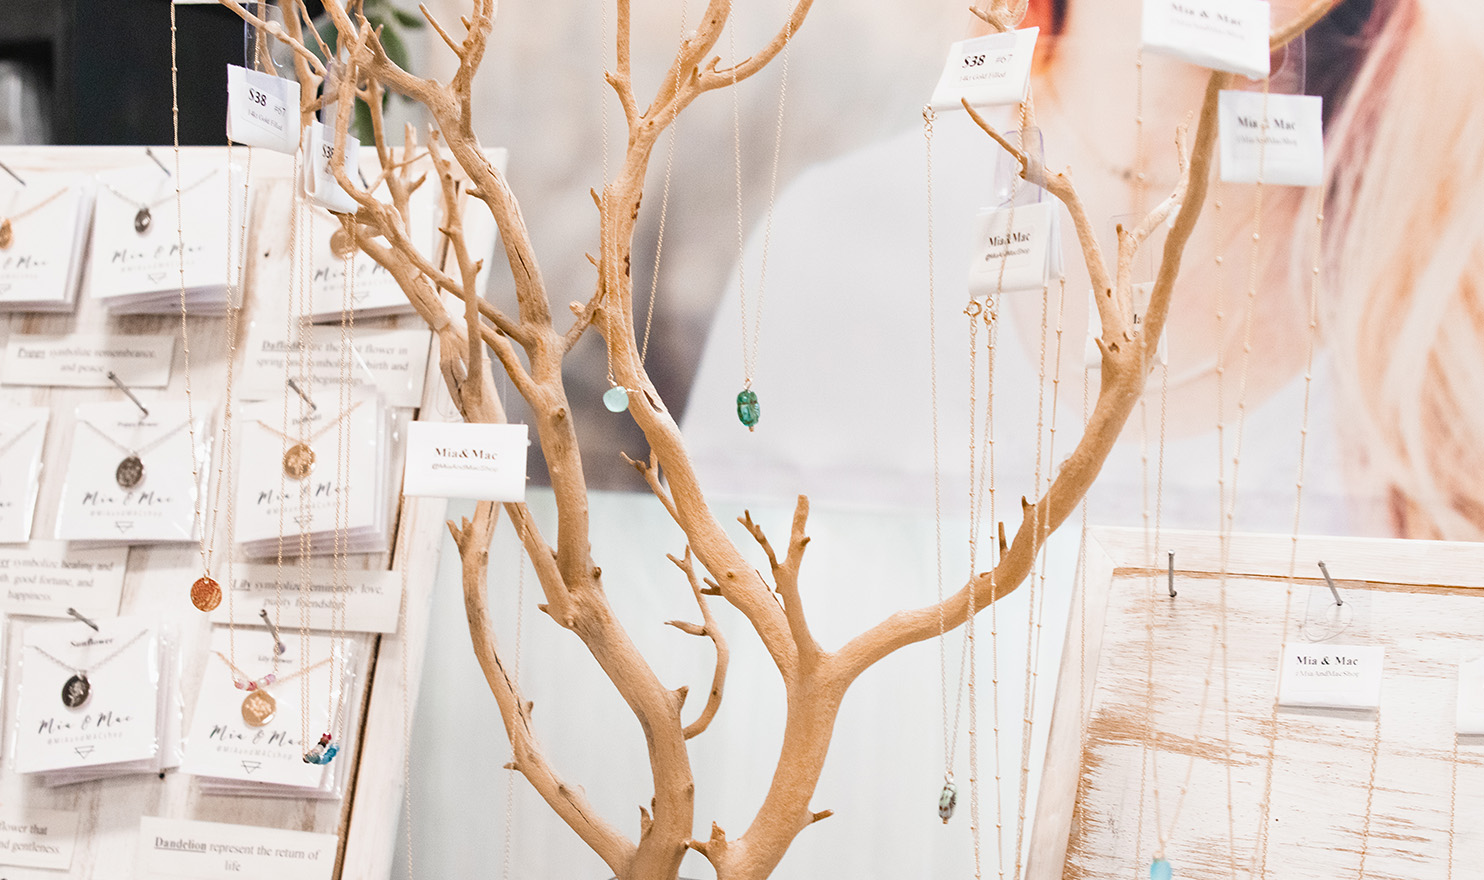 Handmade jewelry is hung on the branches of a small display tree in the Mia and Mac booth.